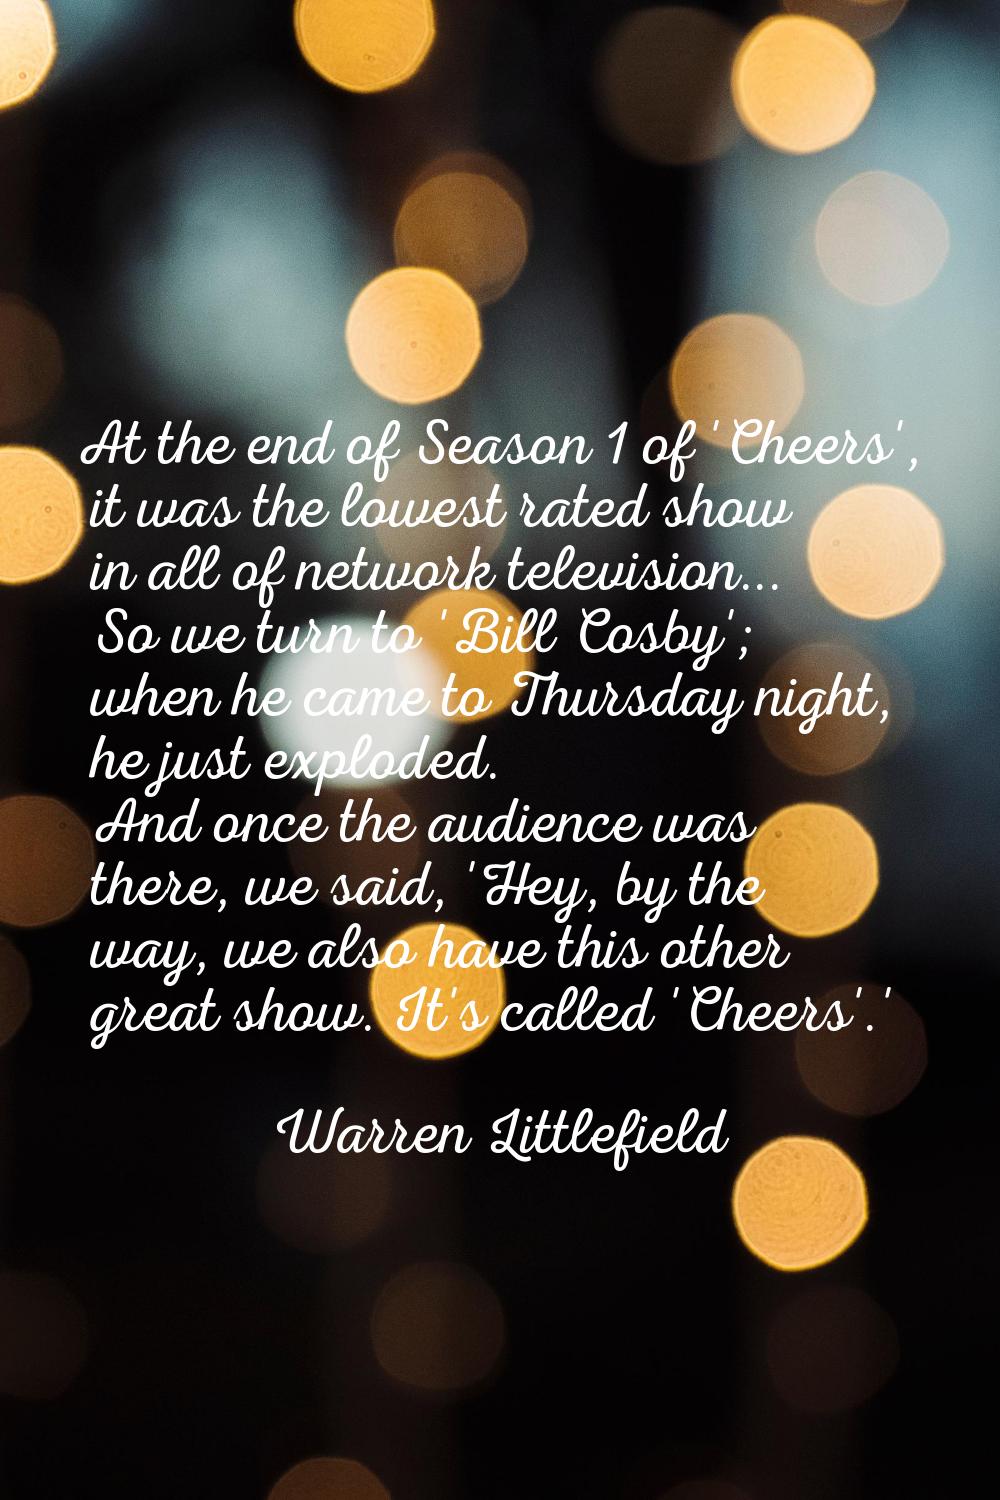 At the end of Season 1 of 'Cheers', it was the lowest rated show in all of network television... So